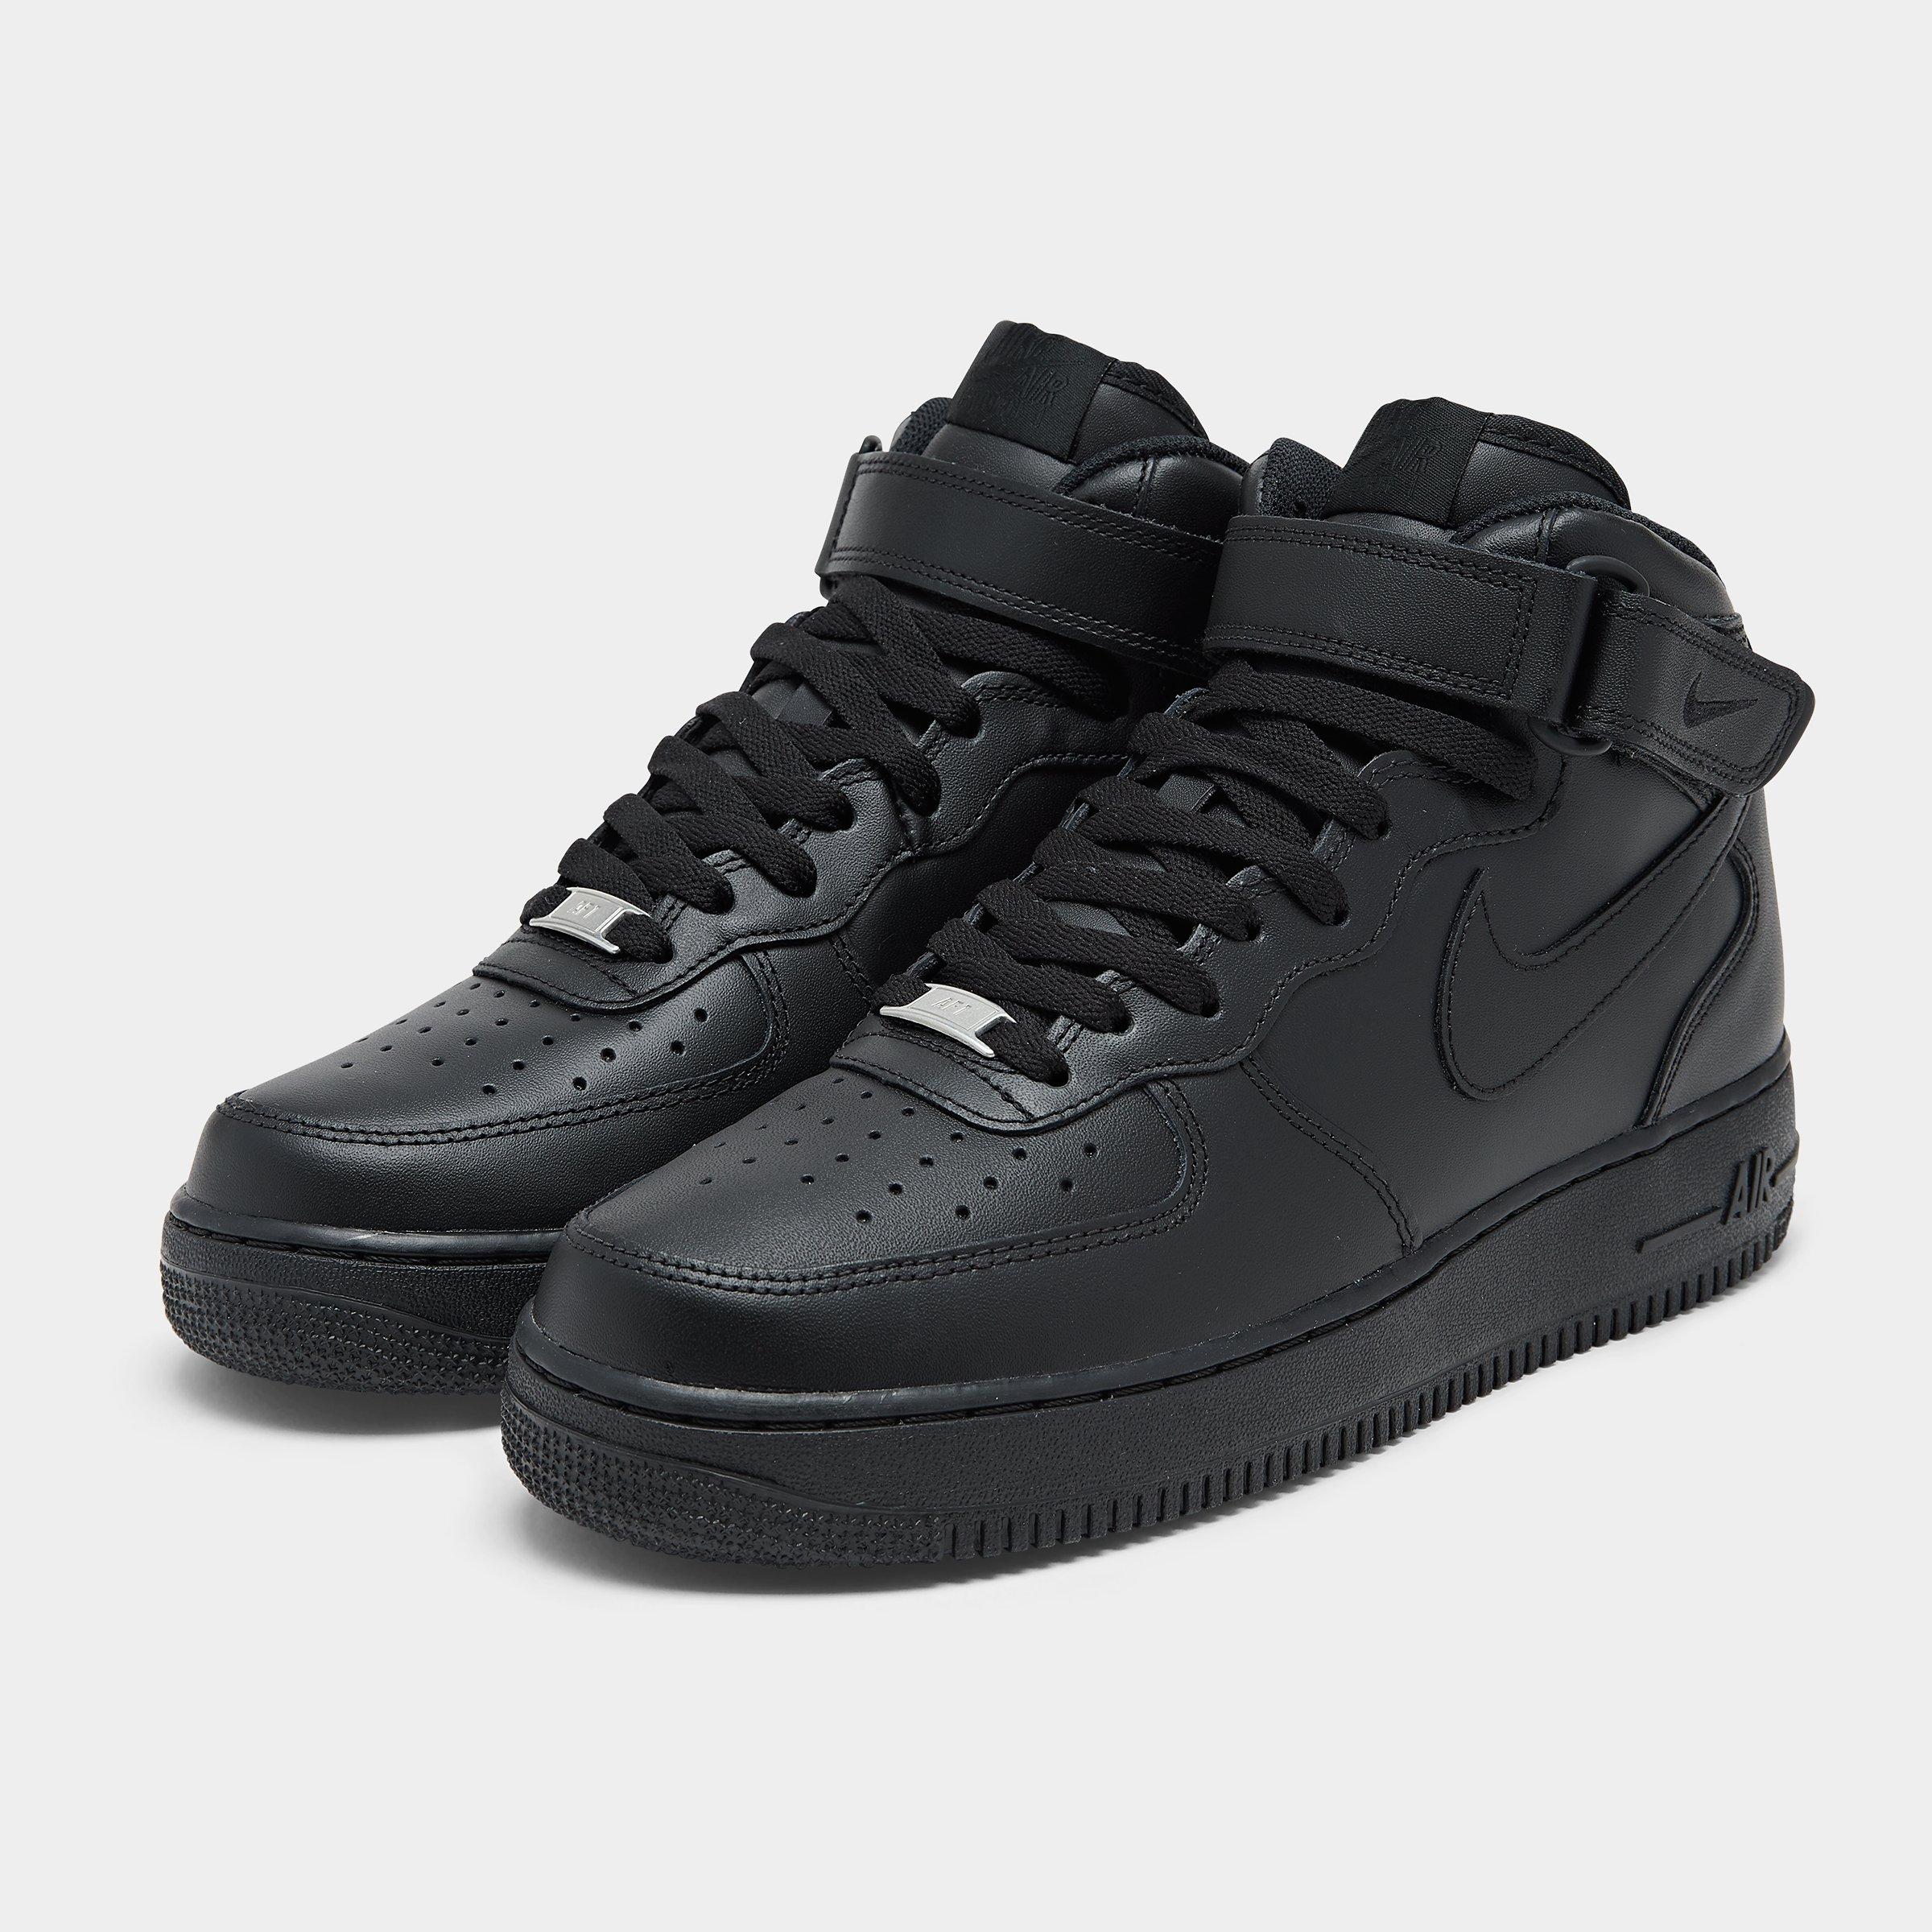 Men's Nike Air Force 1 Mid Casual Shoes 